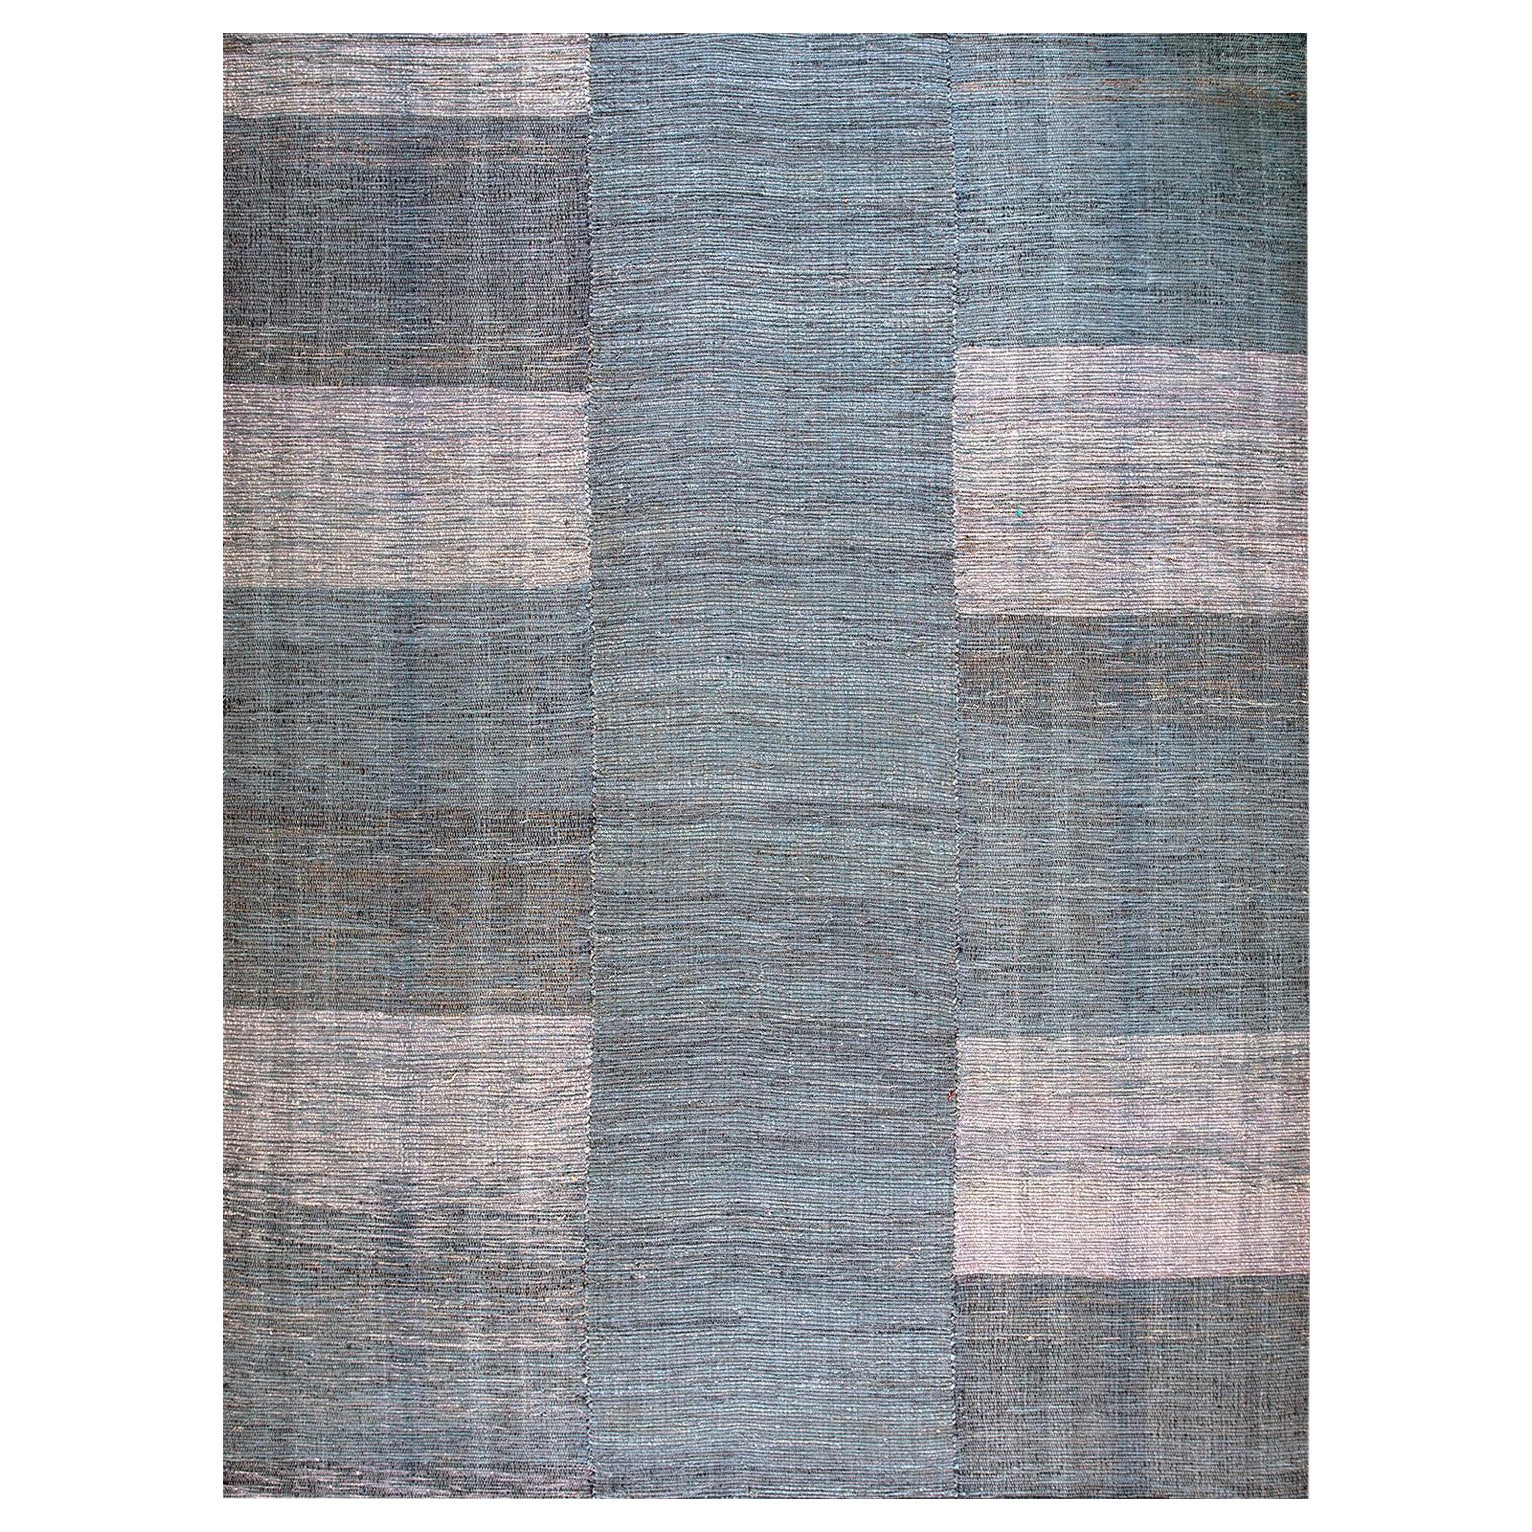 Contemporary Handwoven Wool Shaker Style Flat Weave Carpet 9' 1" x 12' 3" For Sale